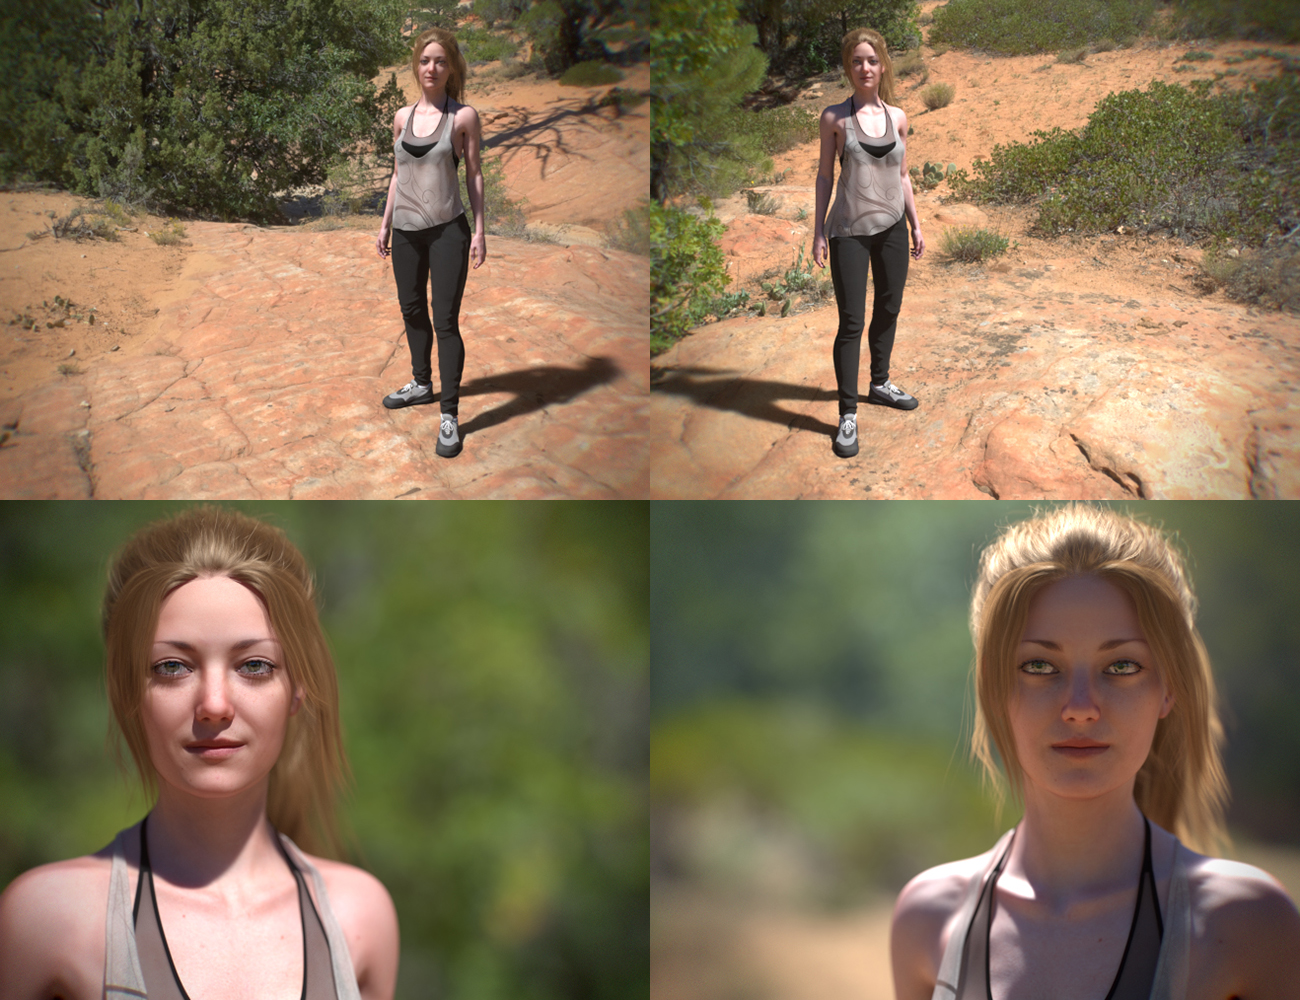 iRadiance Pro Series 16k HDRIs - Zion National Park by: DimensionTheory, 3D Models by Daz 3D